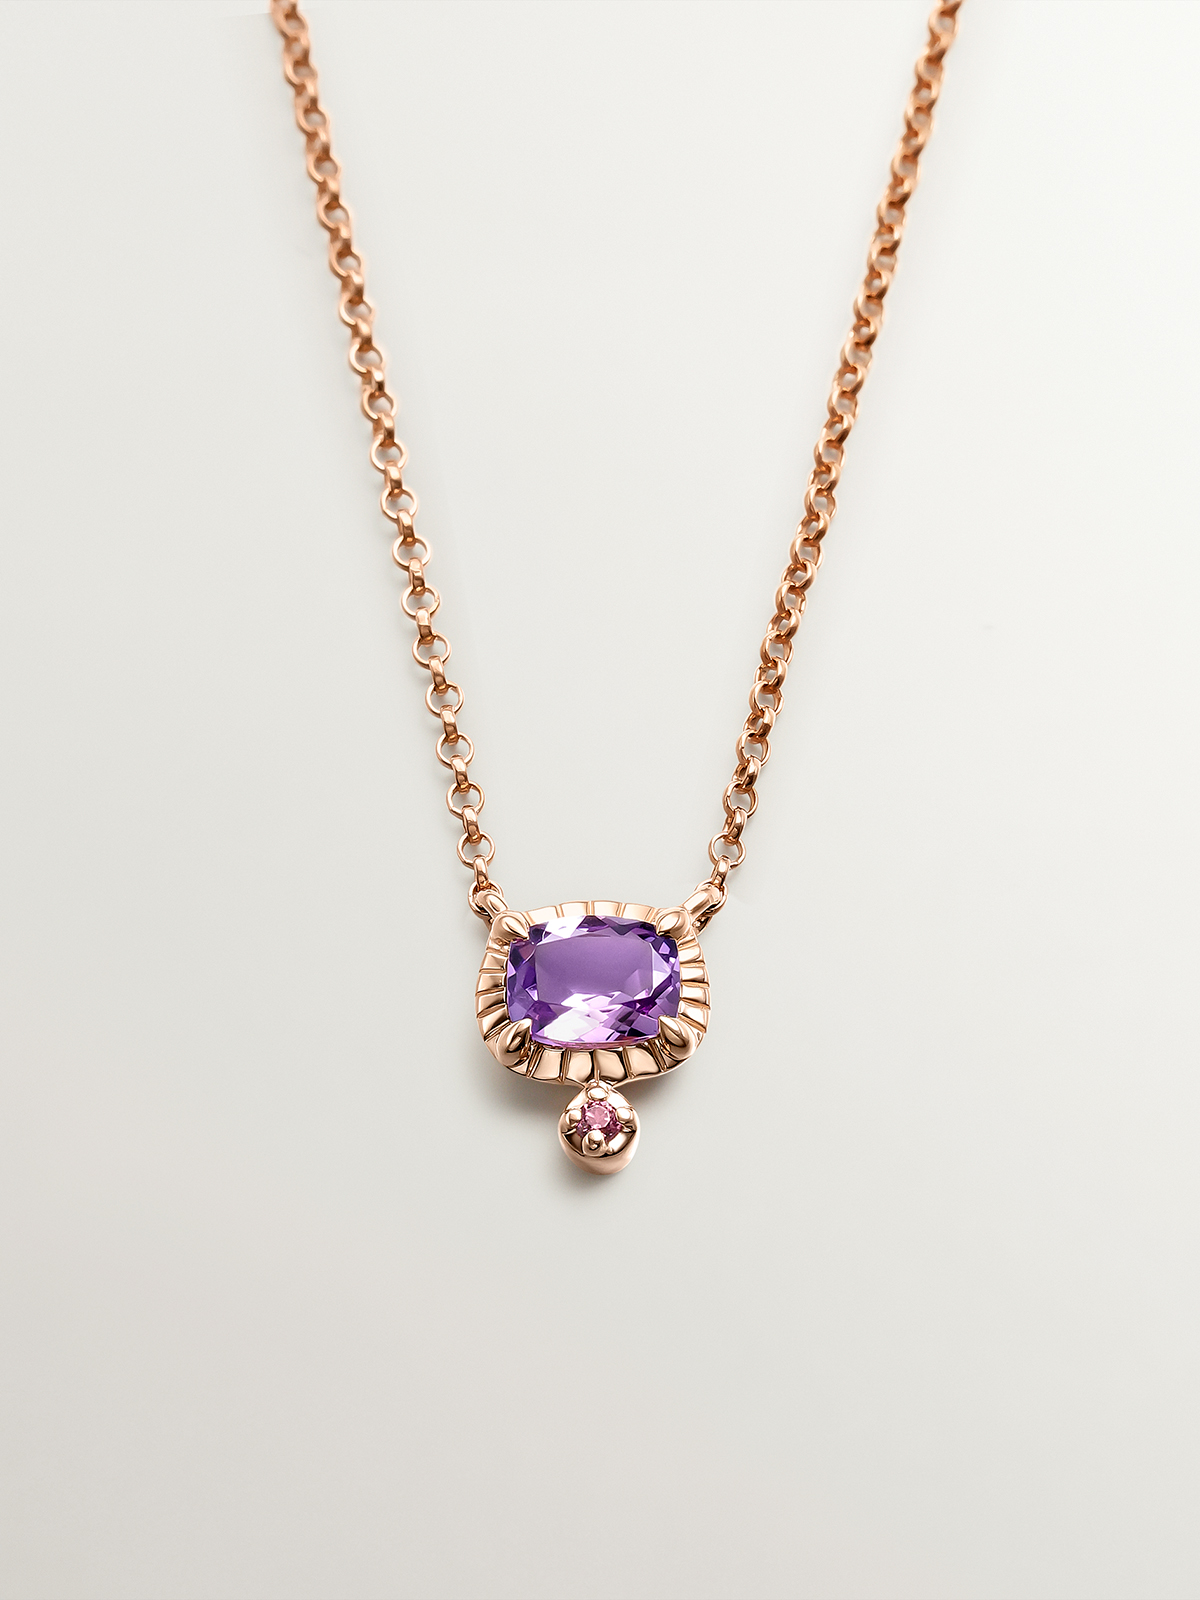 925 Silver pendant dipped in 18K rose gold with purple amethyst and pink rhodolite.